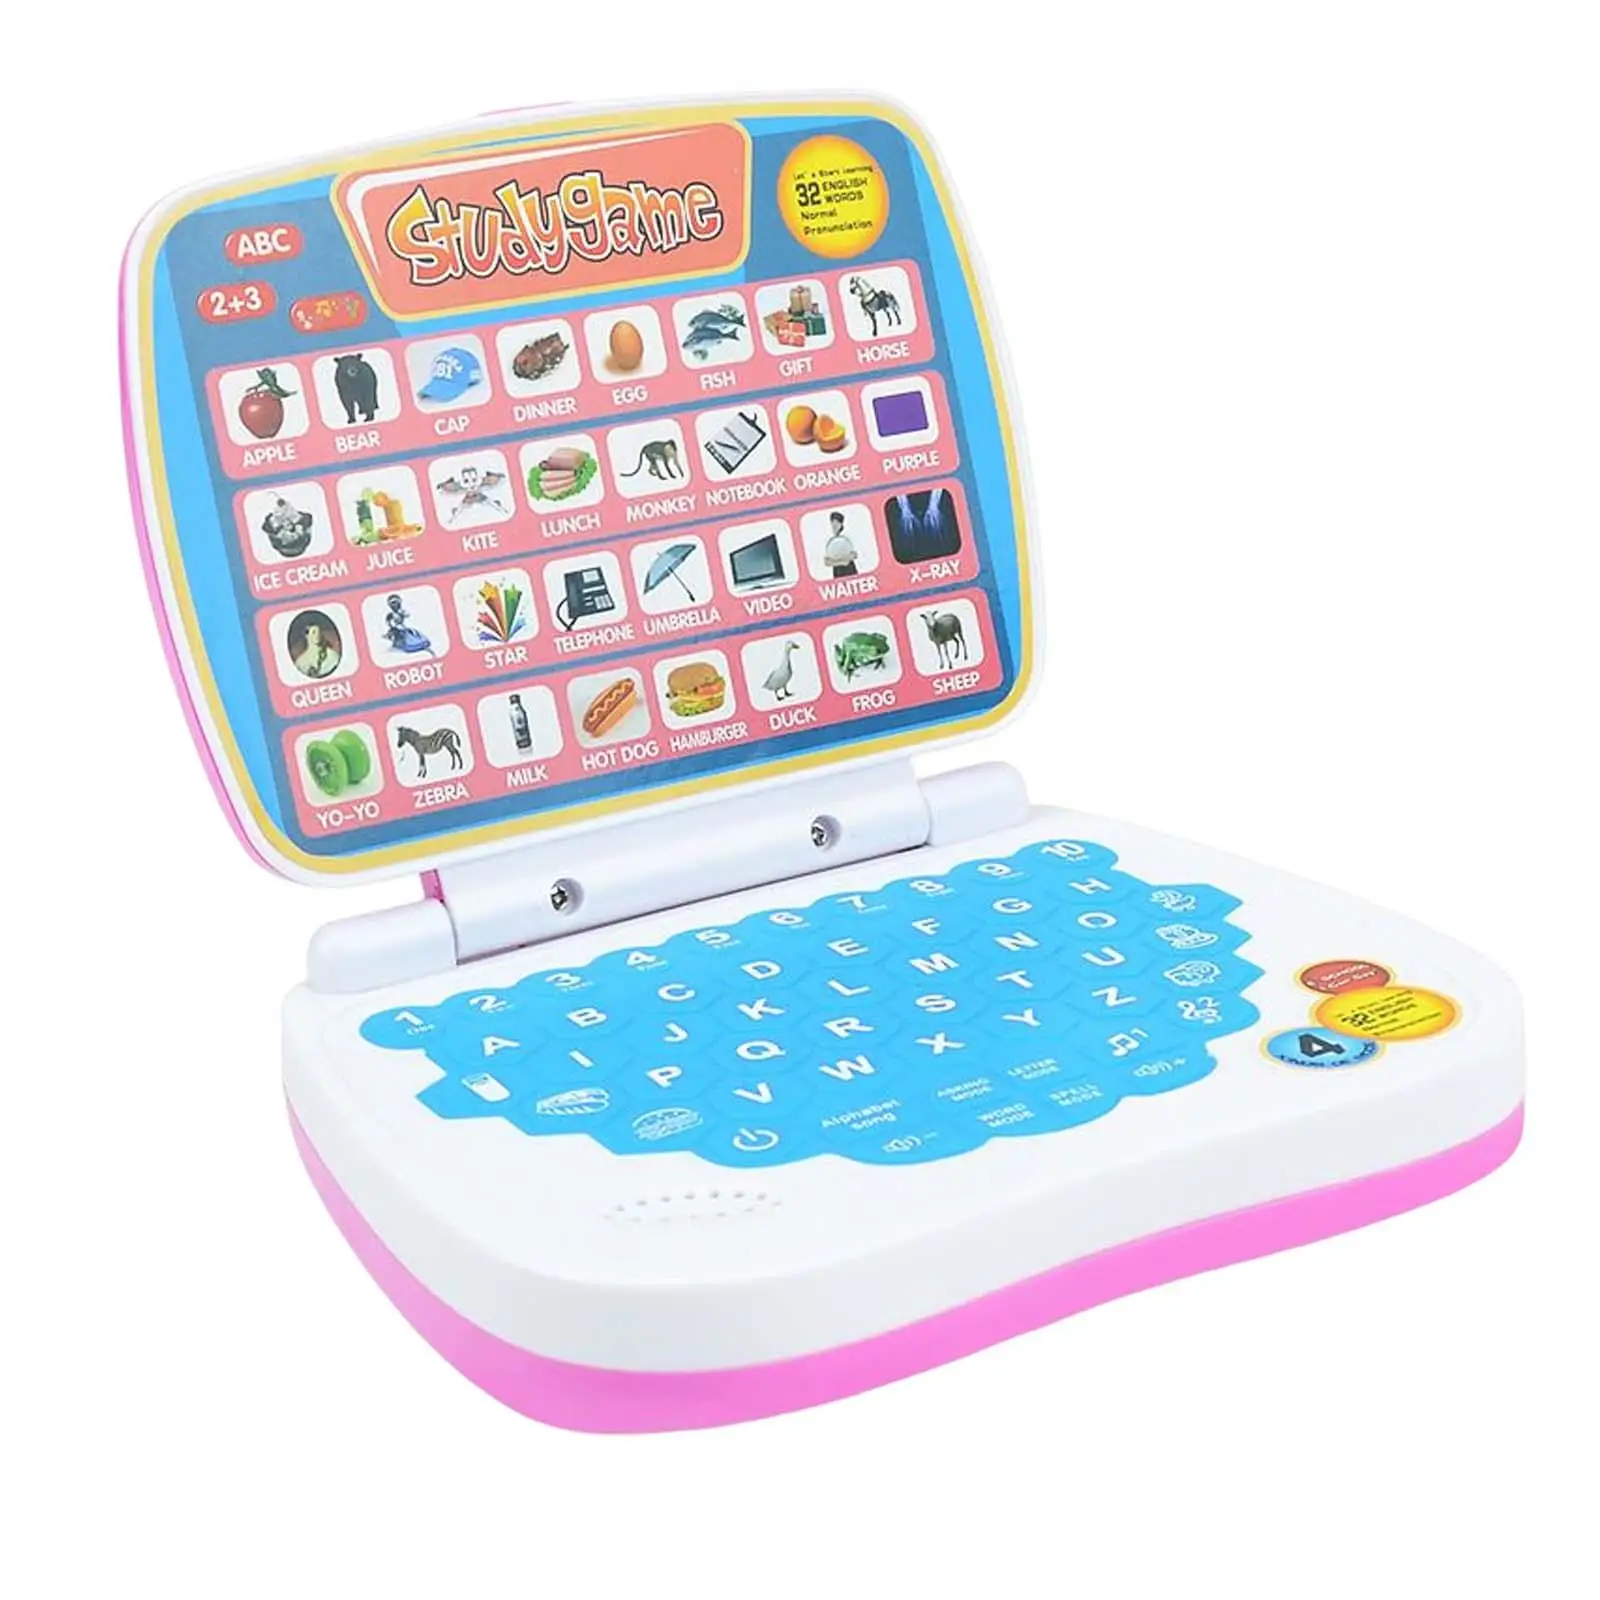 Child Interactive Learning Pad Tablet for Girls Boys Bithday Gifts